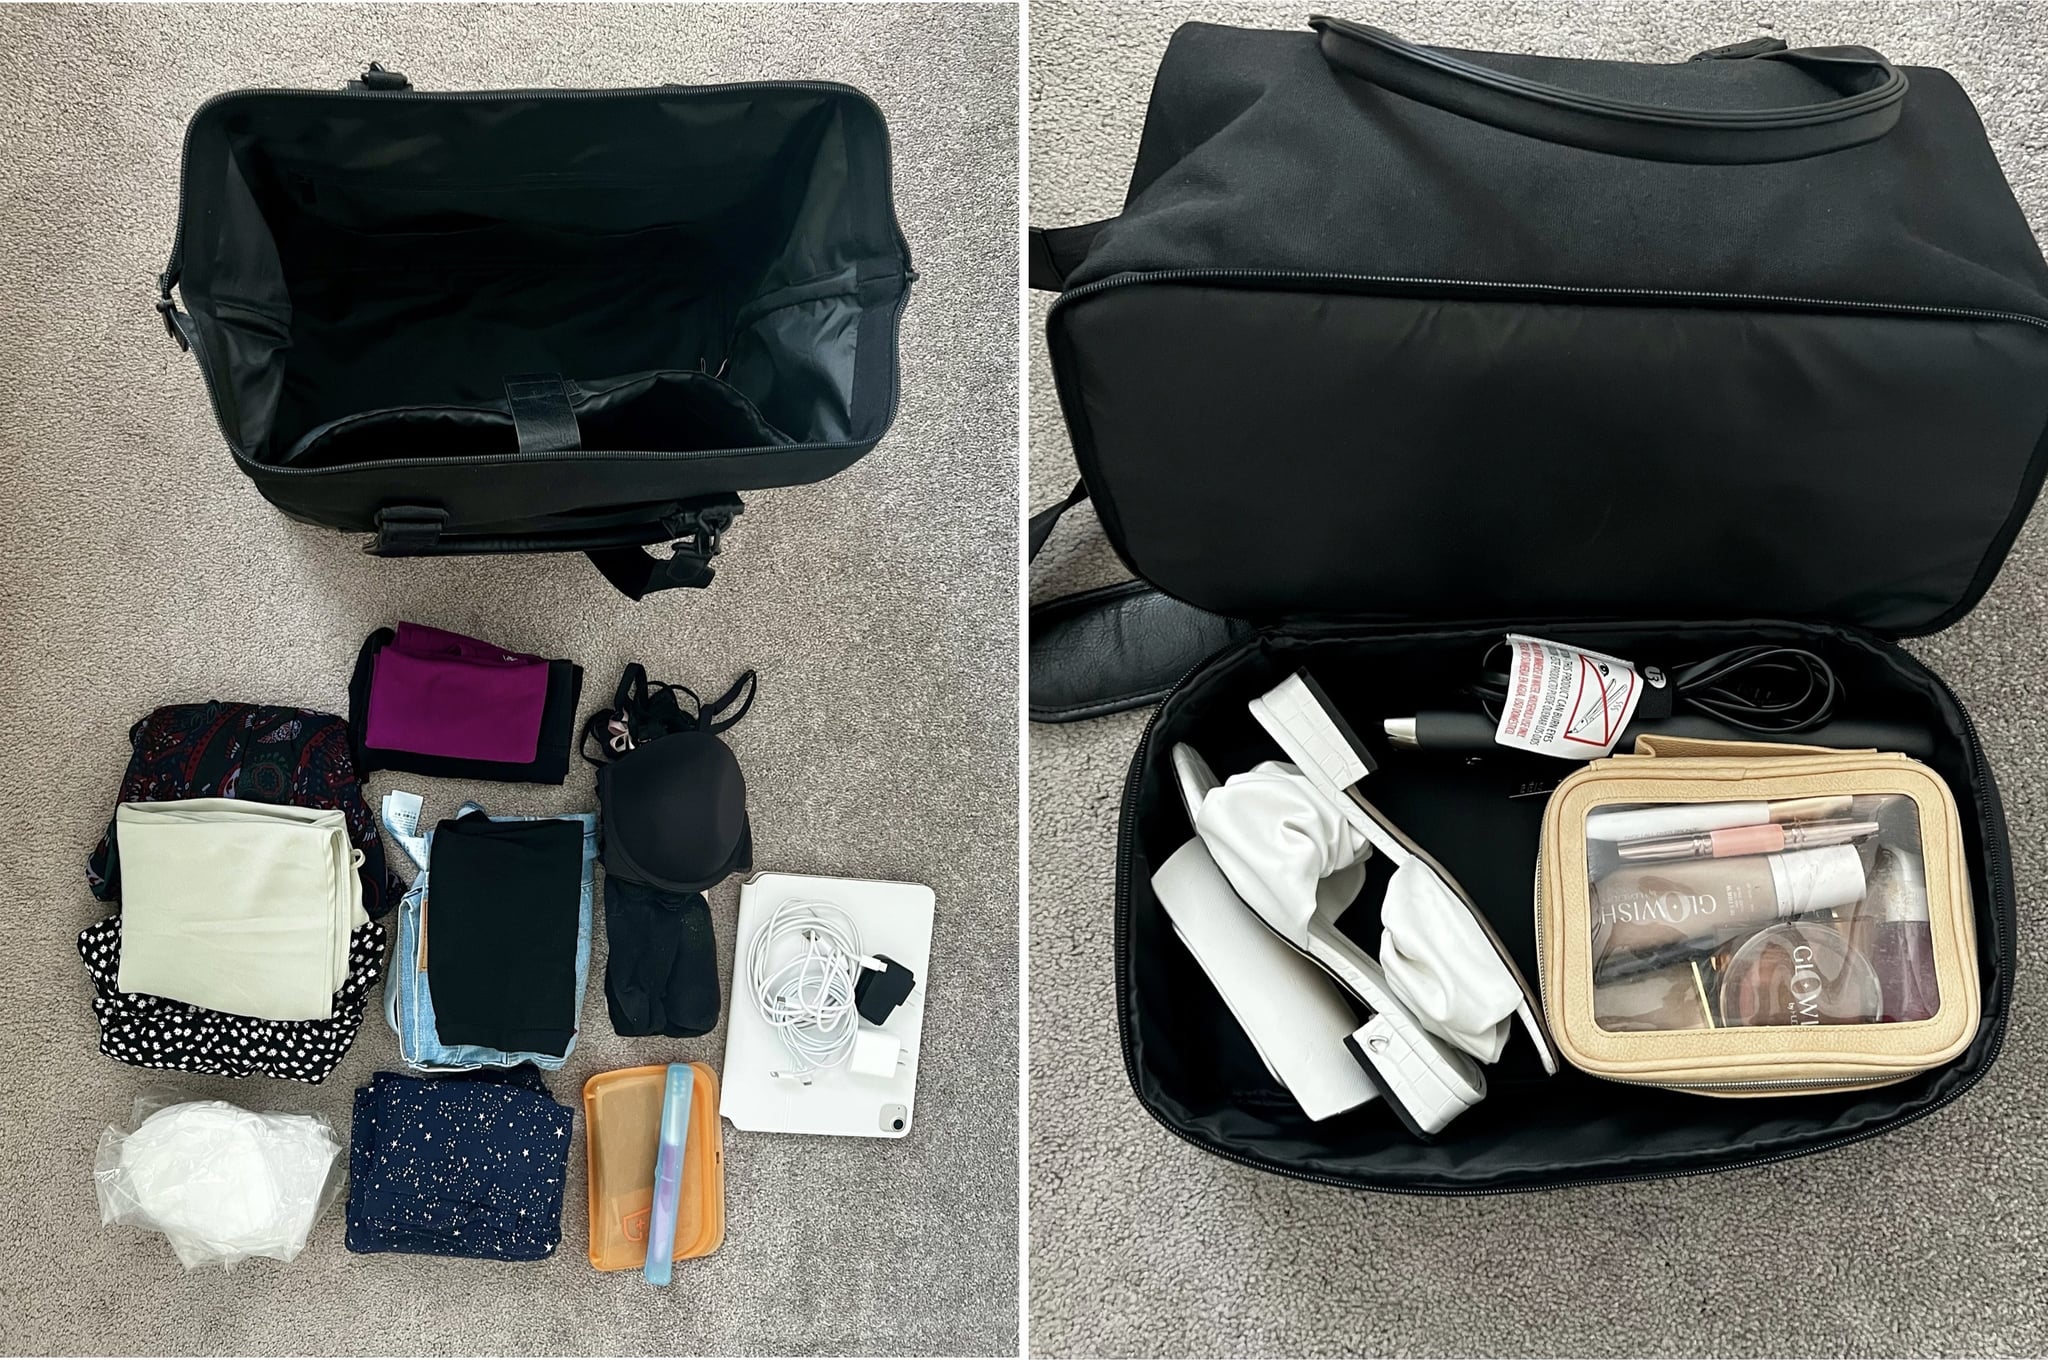 Left image: the Béis Mini Weekender top portion open with clothing, toiletries, and other packing necessities on the ground. Right image: the Béis Mini Weekender bottom portion open with shoes, toiletries, and hair tools in the shoe compartment.